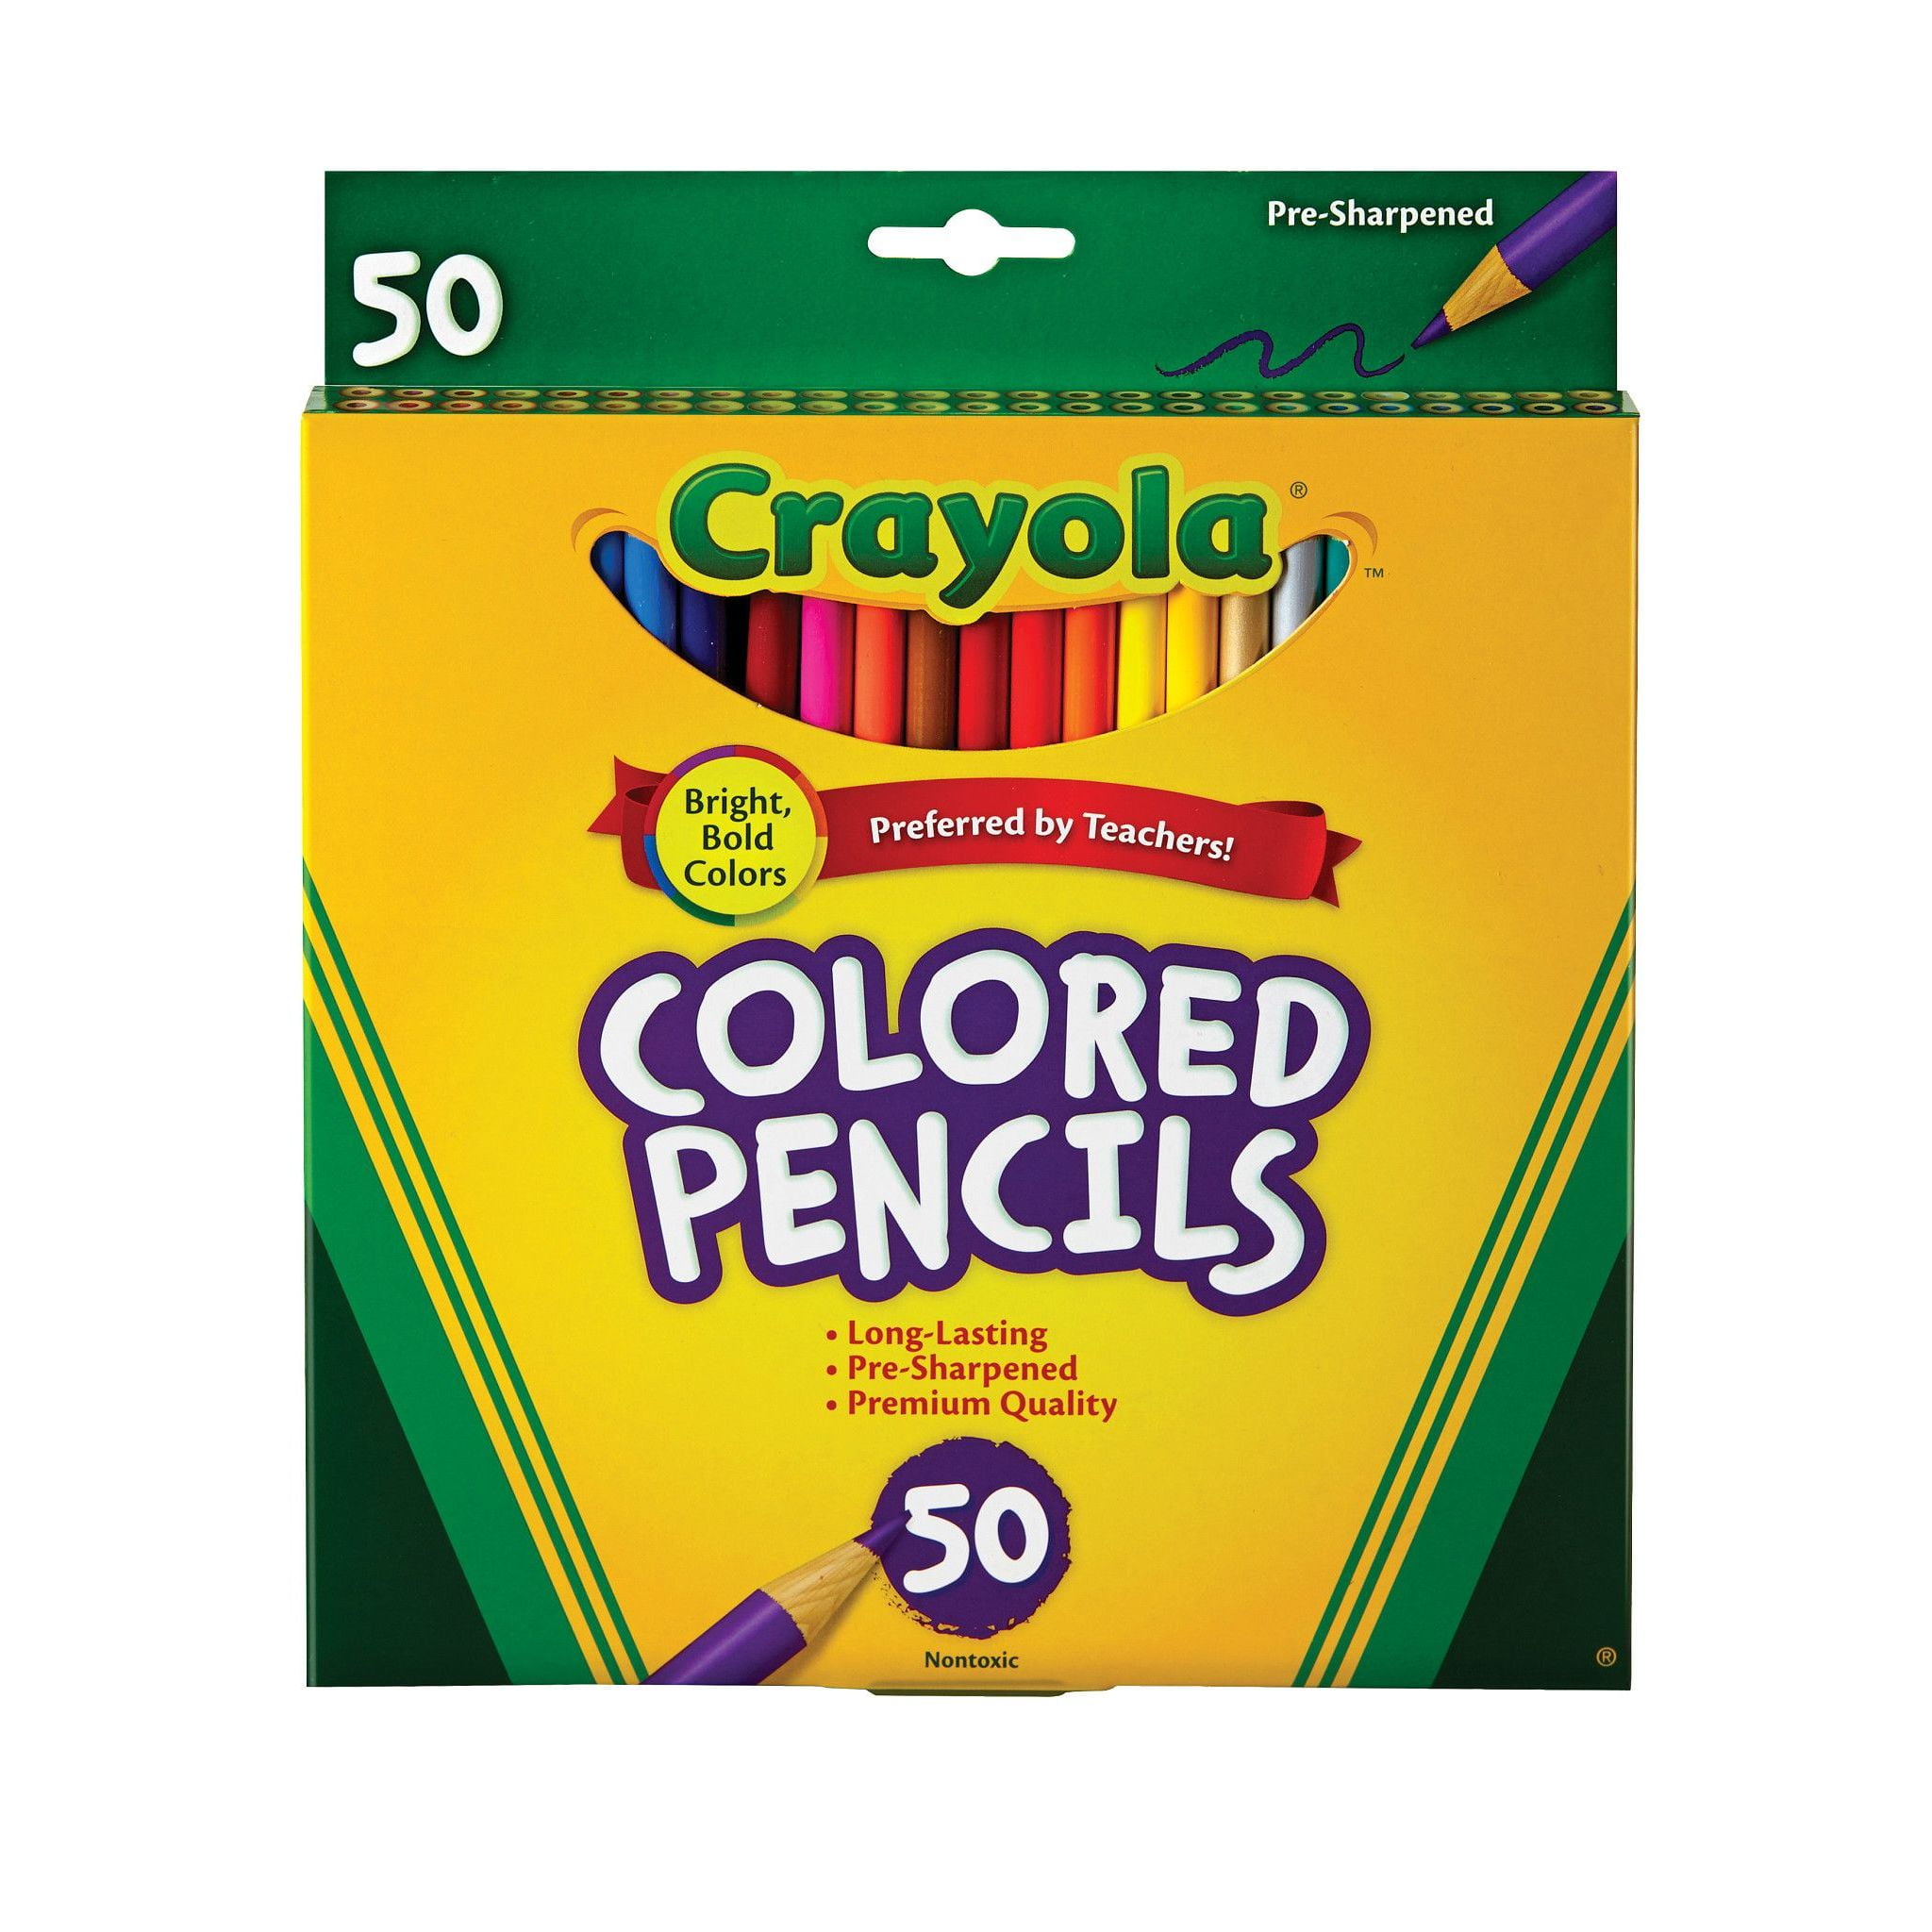 NEW KIDS SMALL HALF-SIZE COLOUR COLOURING PENCILS 2 x PACKS OF 48 CHILDRENS 